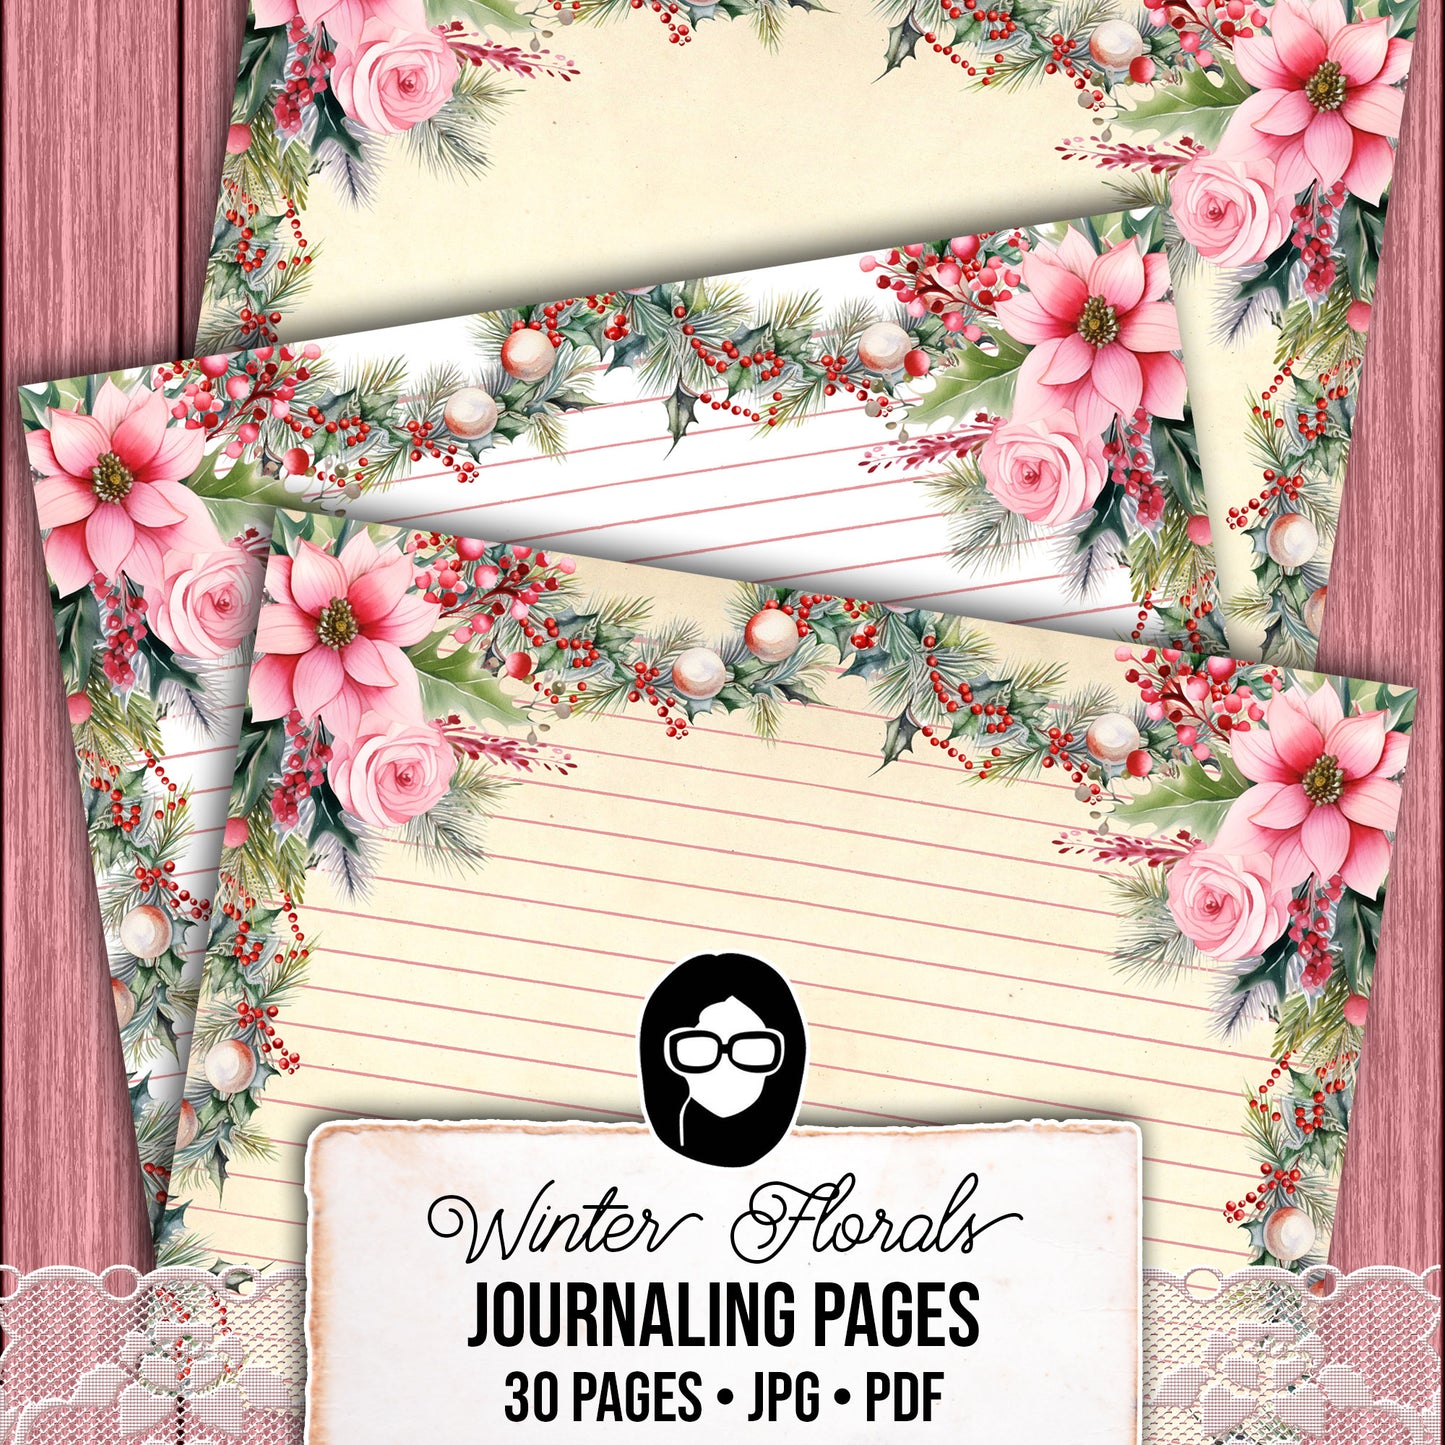 Christmas Journal Pages, Lined Journaling Papers -30pg Digital Download- Holiday Printable Paper, Christmas Flowers, Pink Holly Berries